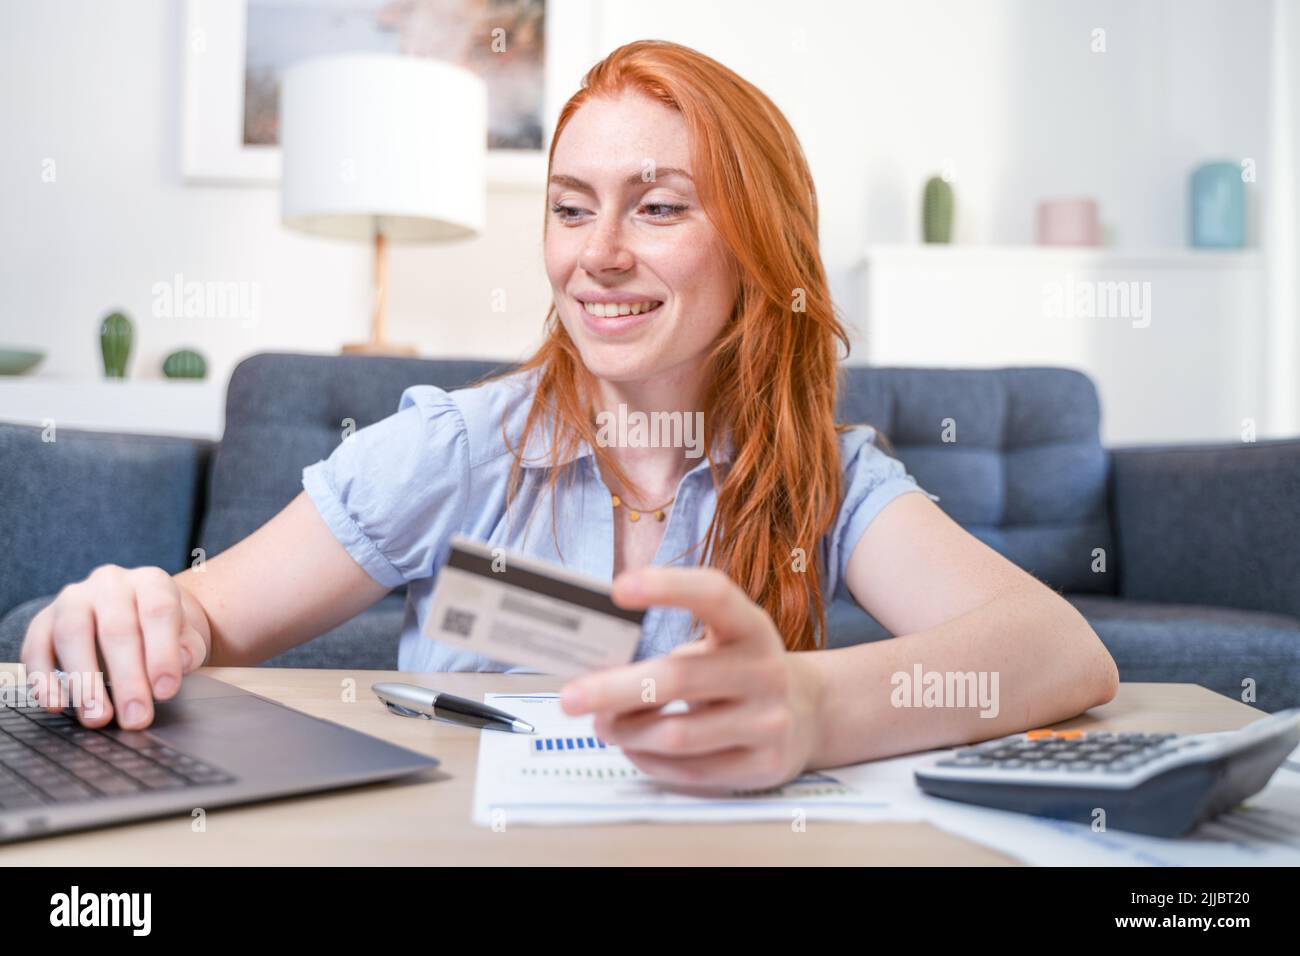 Happy woman using credit card purchase at home Stock Photo